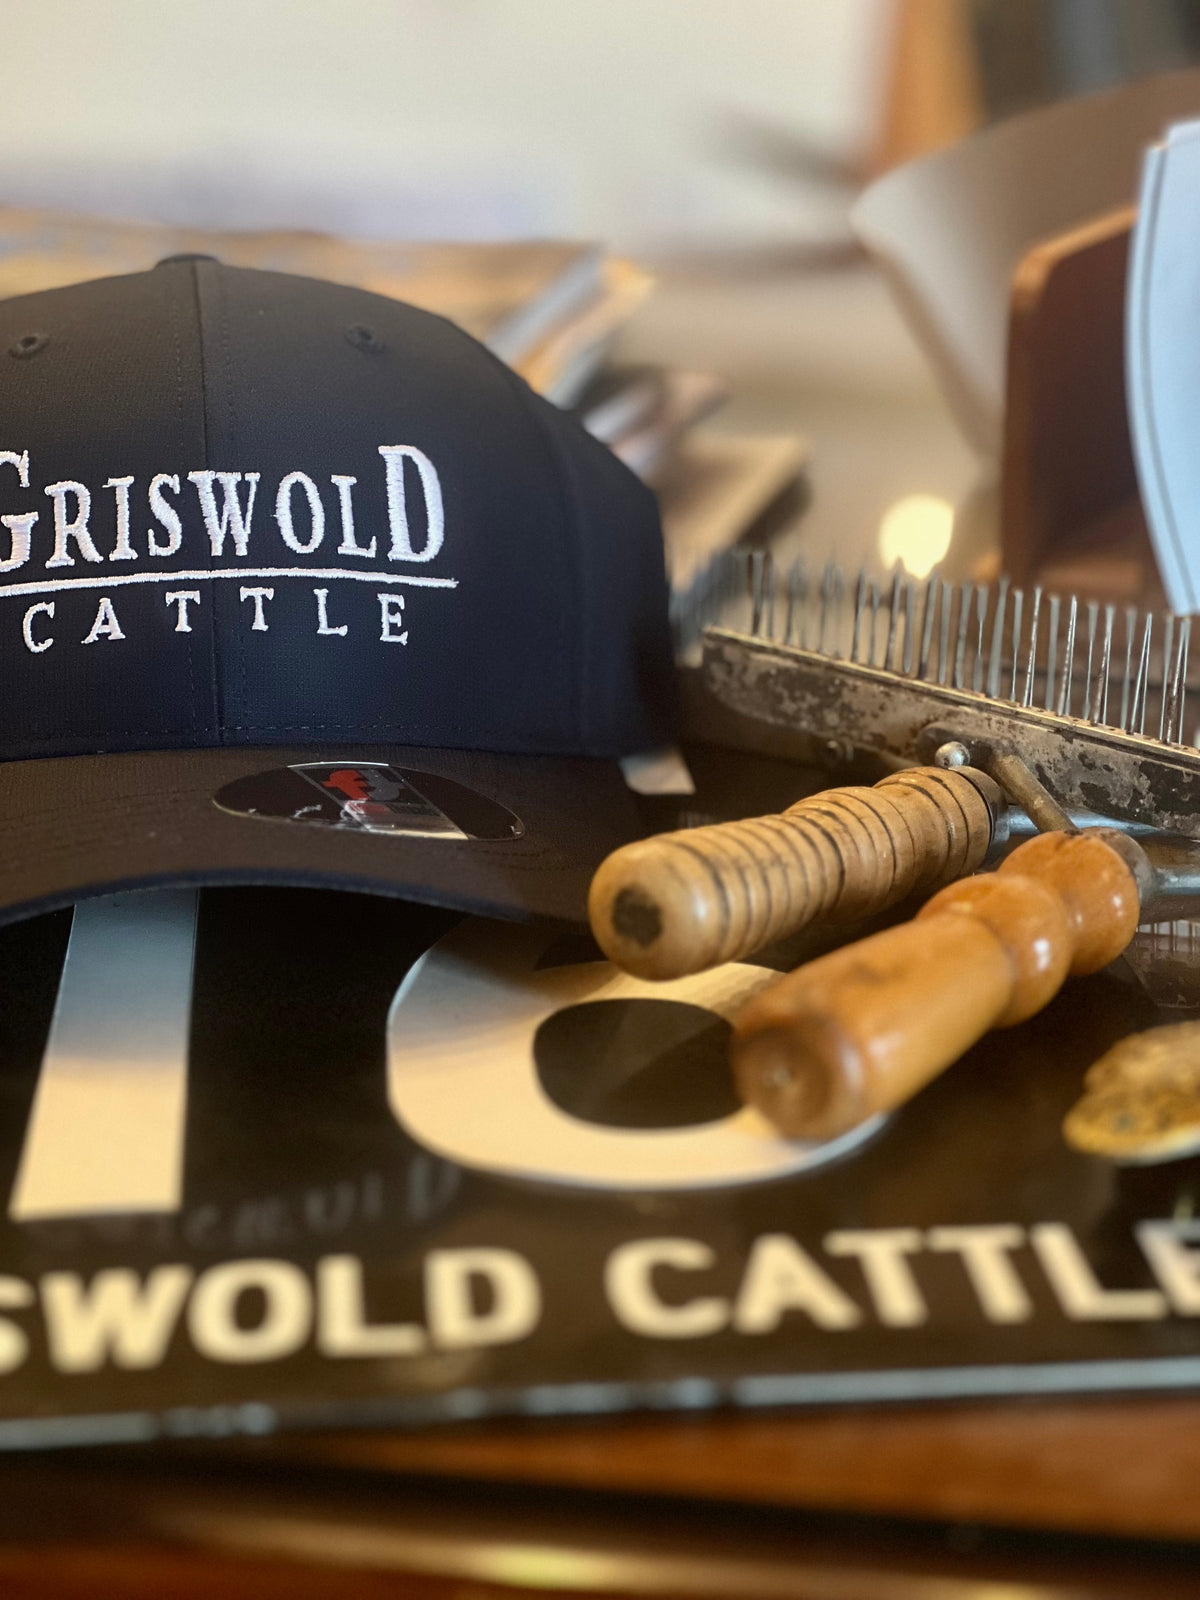 Navy Griswold Cattle 225